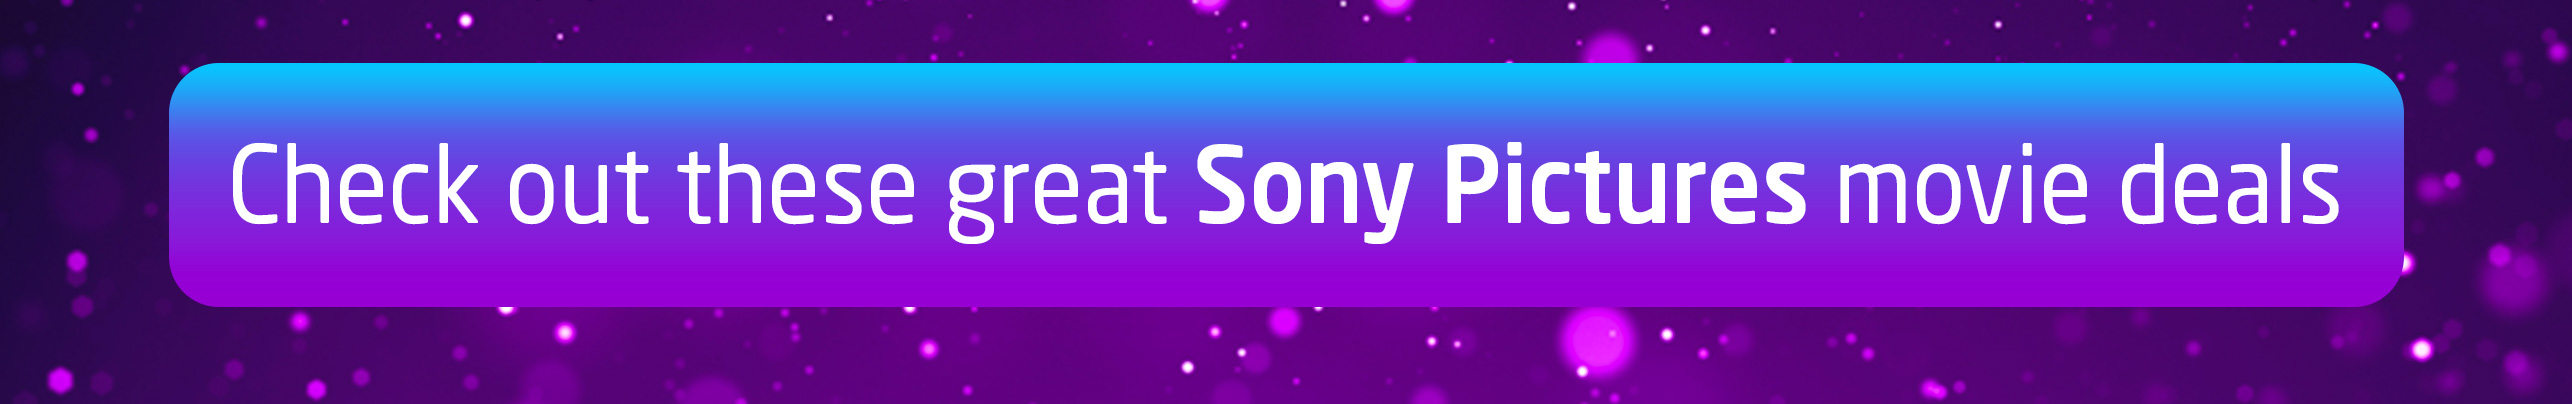 Movies Anywhere Sony Pictures Deals